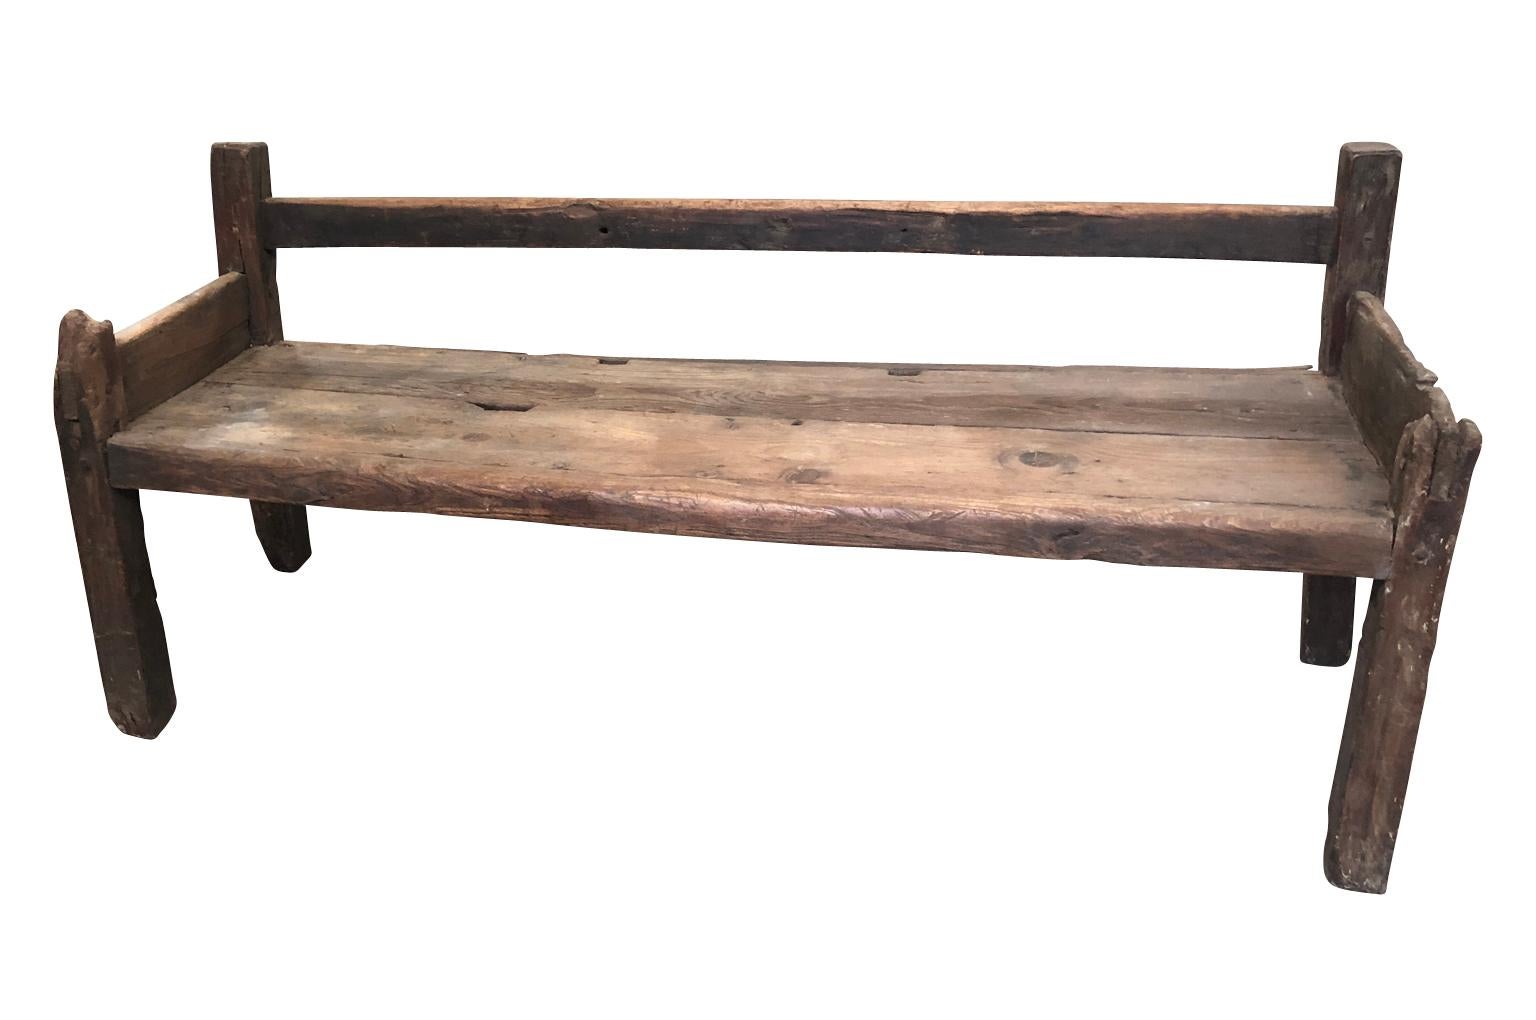 A very handsome 17th century bench from the Catalan region of Spain. Soundly constructed from oak with an outstanding patina. The bench's elegant Minimalist lines make it a perfect match with a traditional or modern surrounding.